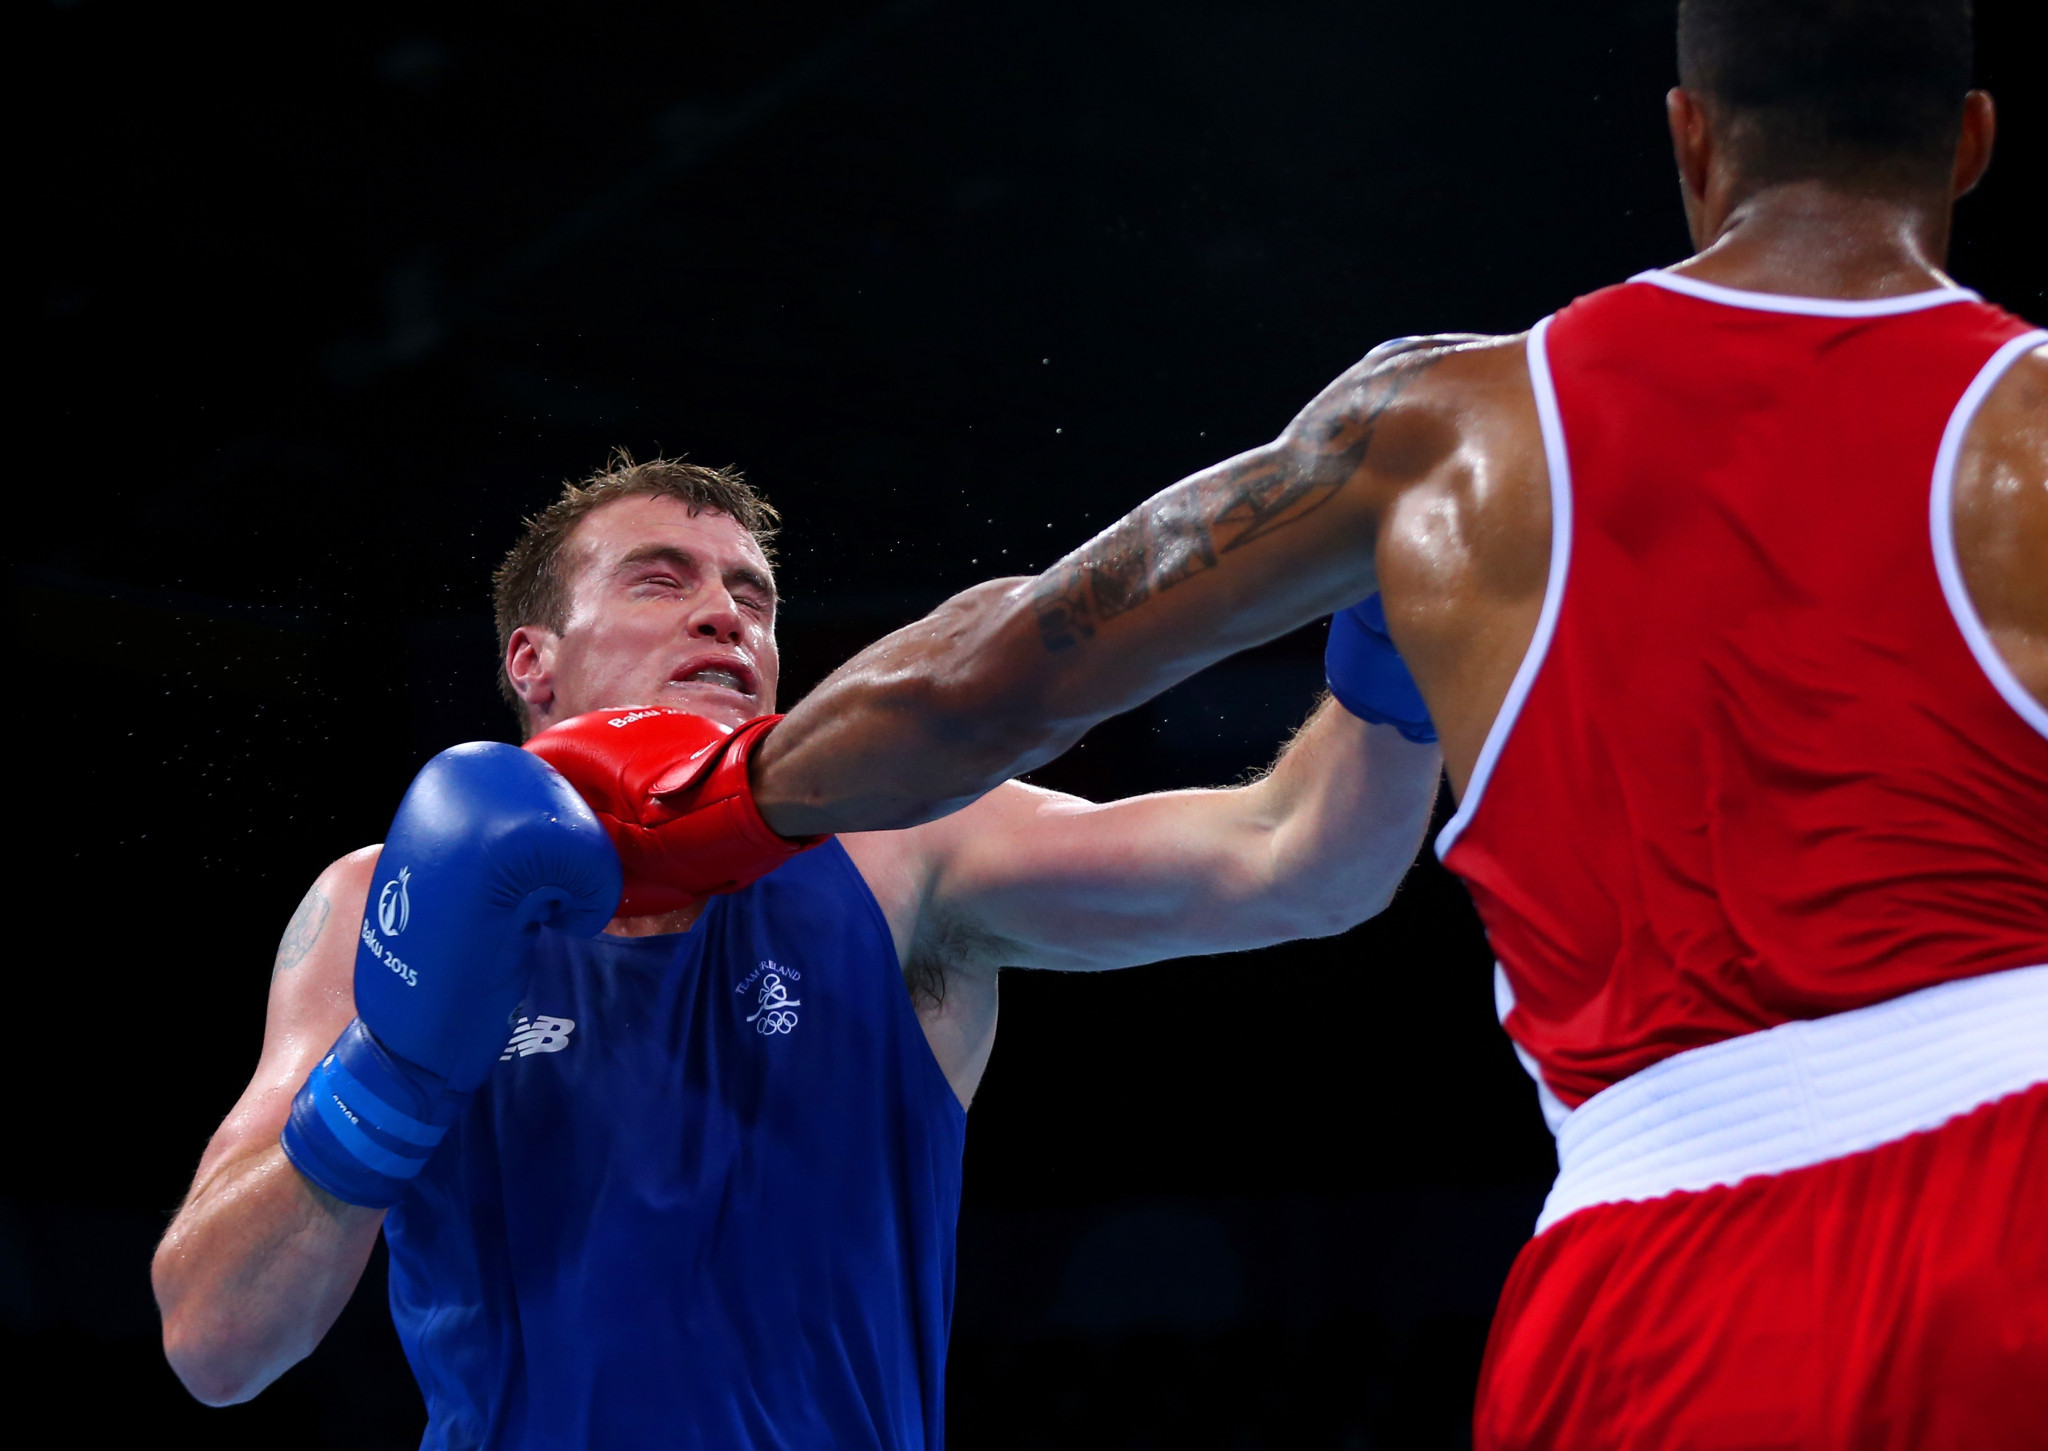 Dean Gardiner was due to fight Russian Ivan Veriasov in the last 16 of the super-heavyweight competition at the European Olympic boxing qualification tournament in London ©Getty Images